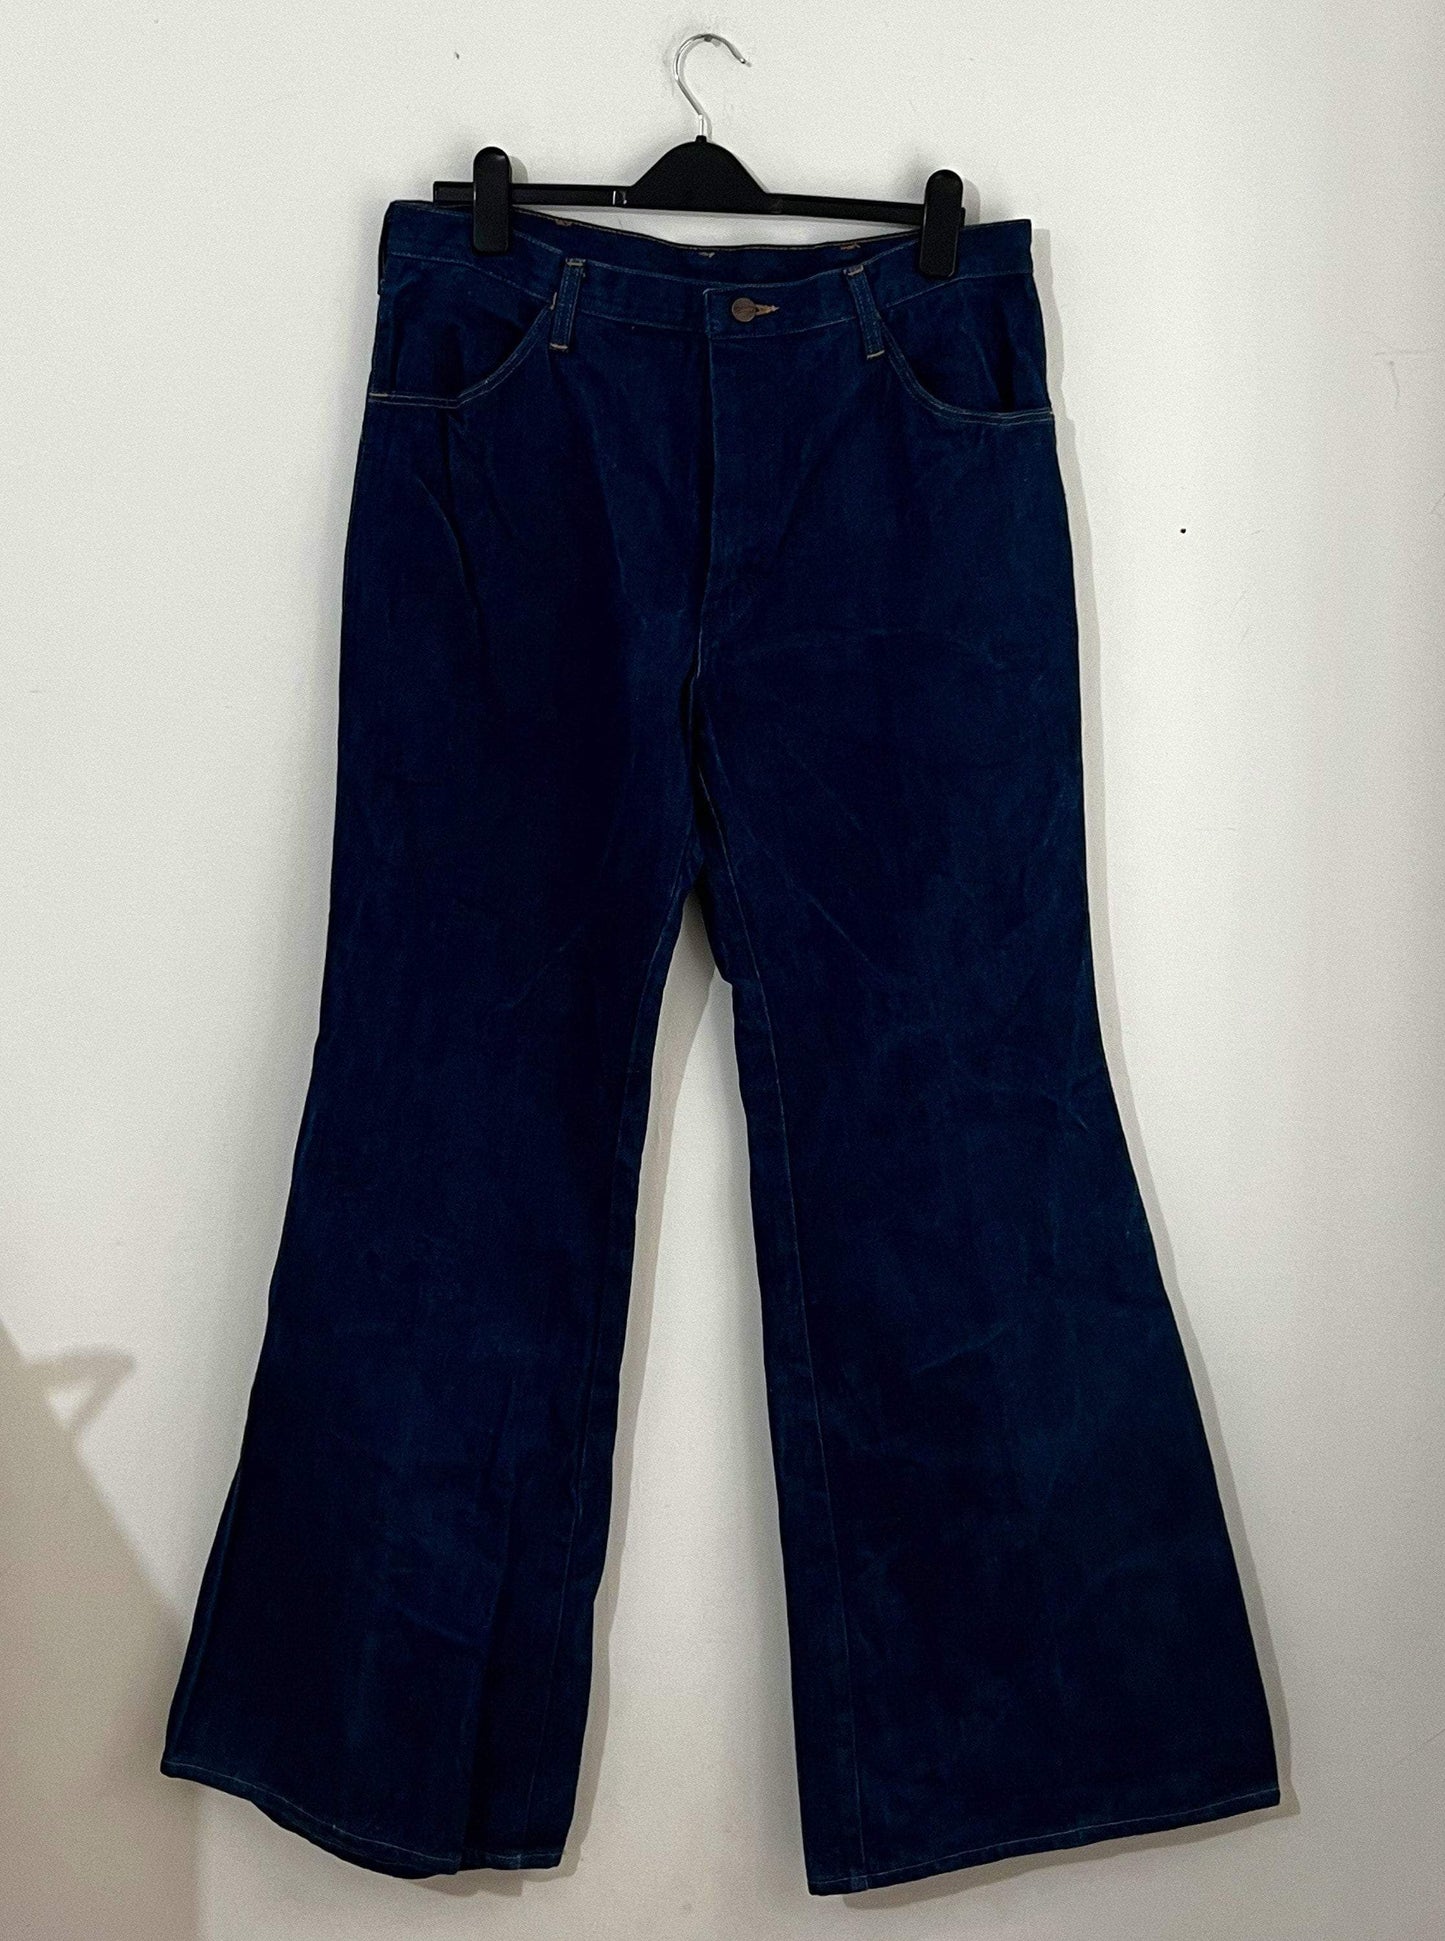 Vintage Wrangler Jeans Vintage Wrangler Jeans W38 L32 Blue UK Size 16 Pretty Vintage - Hand Curated Vintage